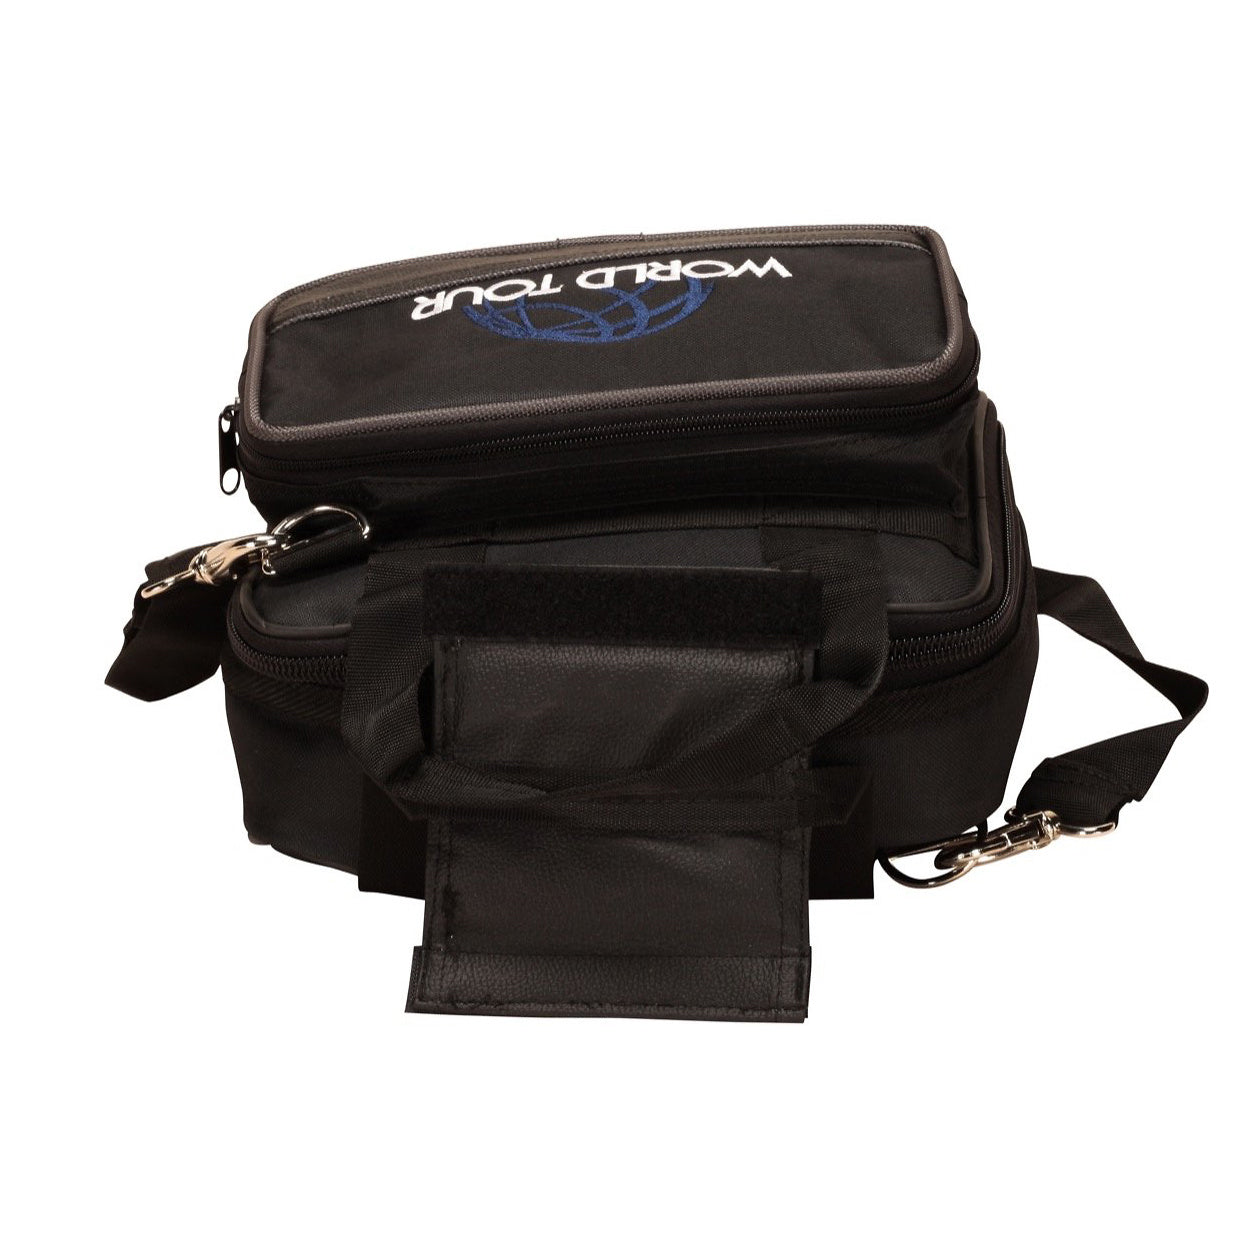 World Tour Gig Bag, 13.25 x 9.5 x 3.5 in.